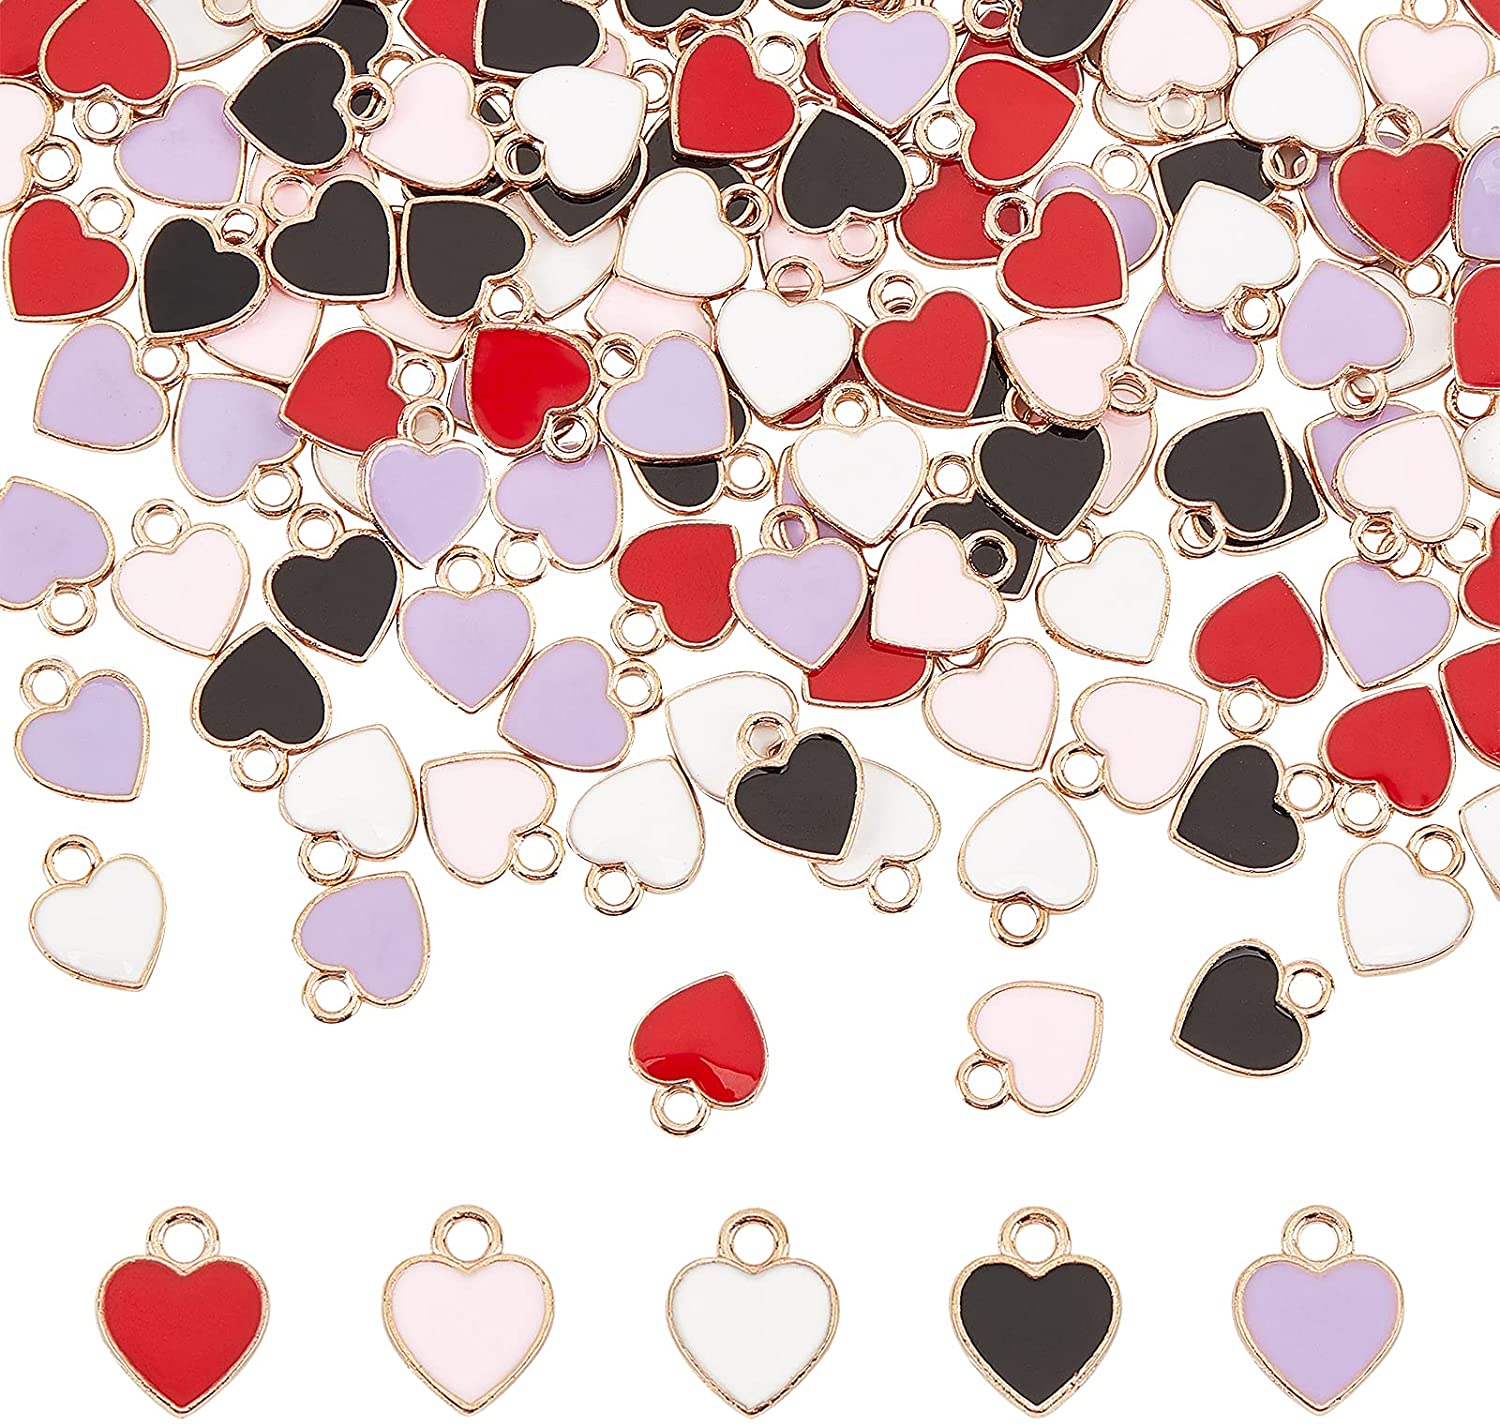 Red Love Heart Alloy Pendant For Necklace Bracelets Earring Diy Jewelry Making 